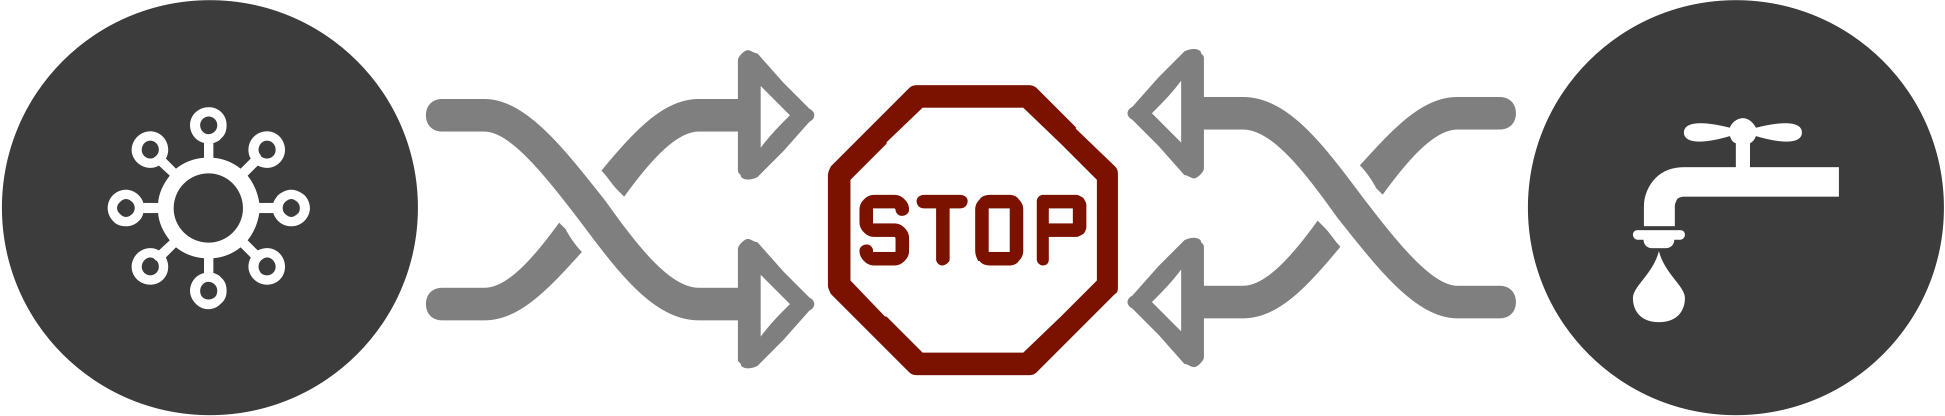 Stop Covid 19 and Legionnaires' Disease